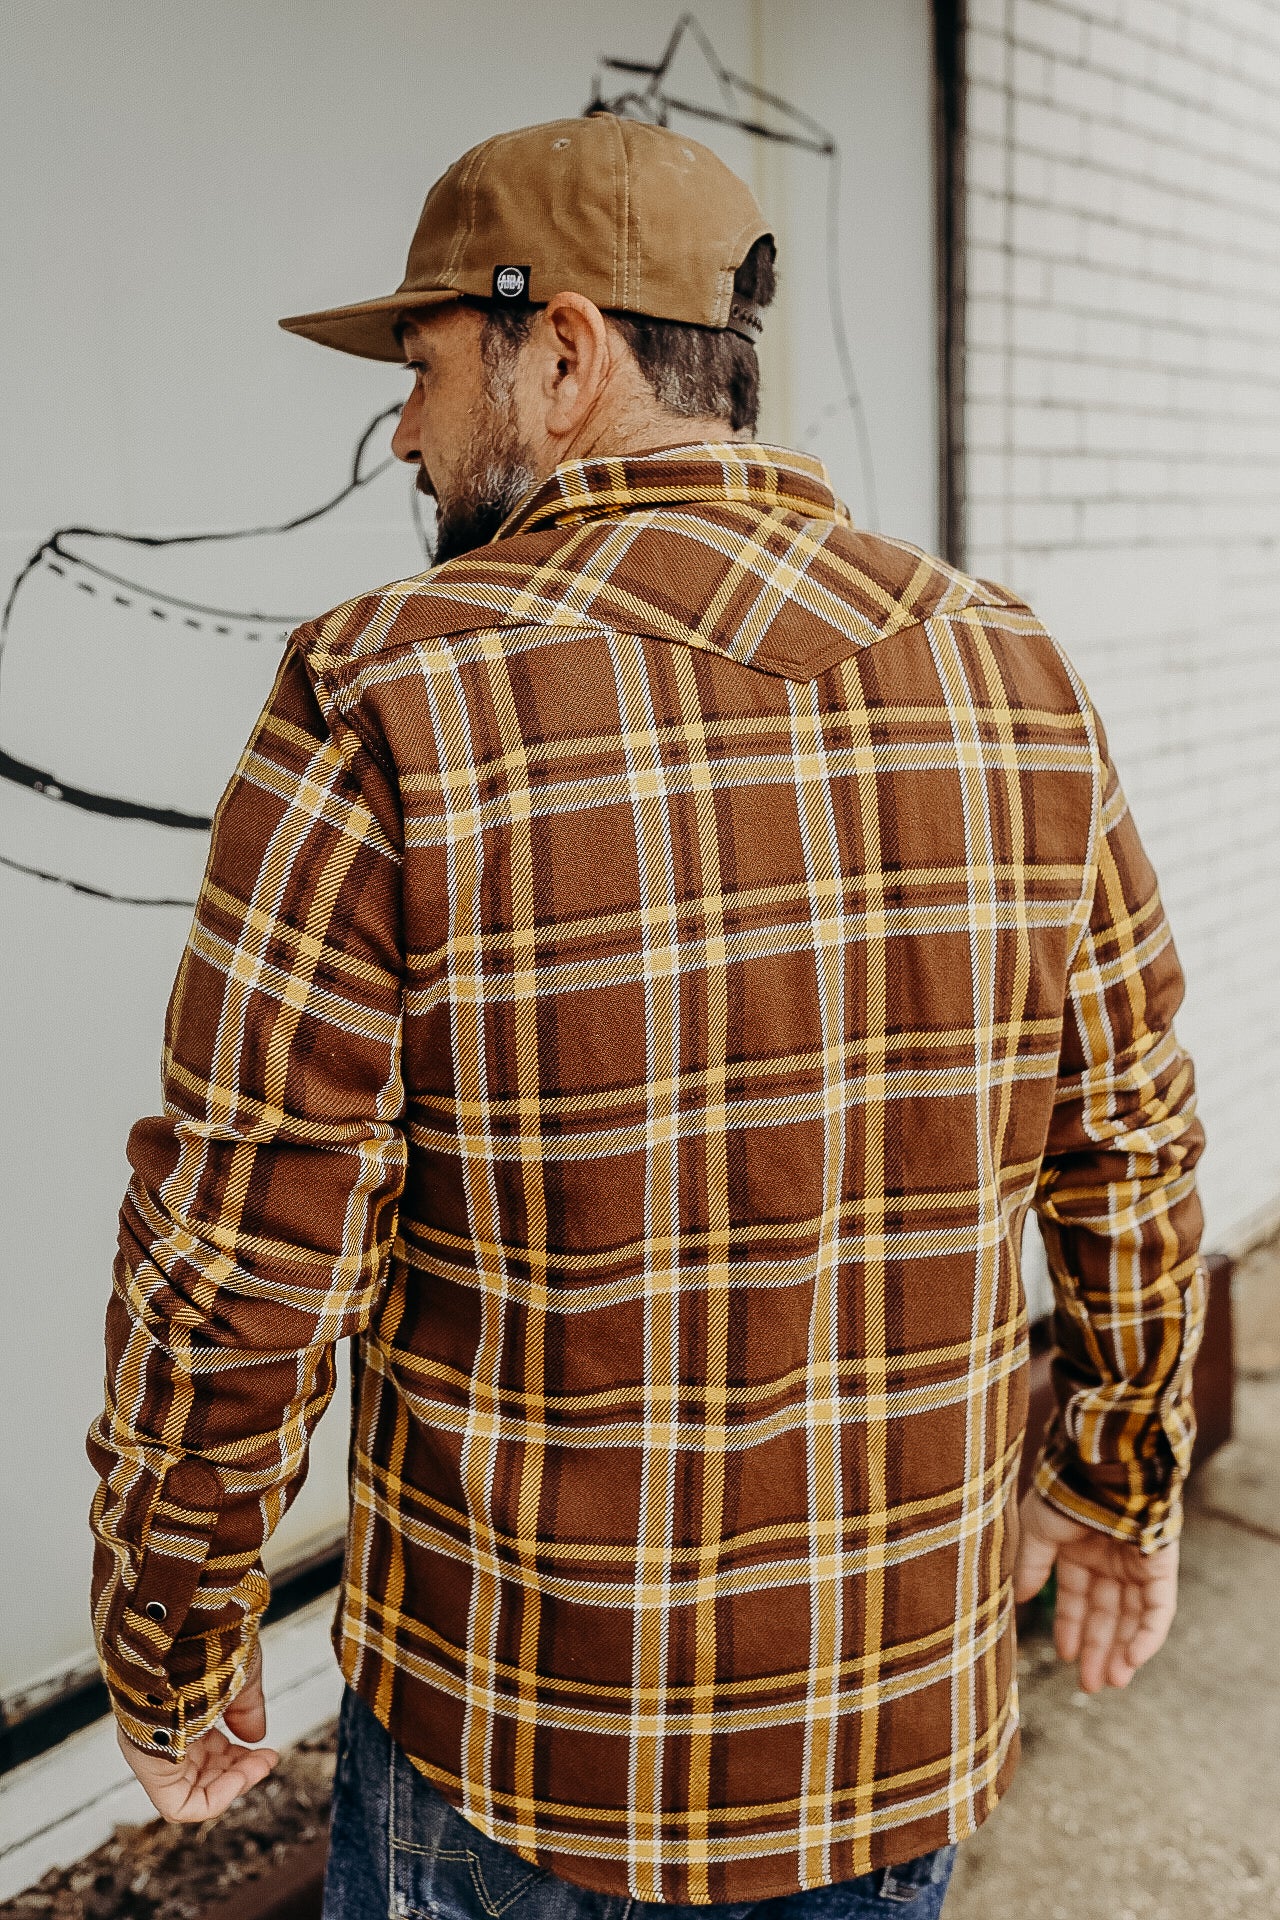 Ultra Heavy Flannel Crazy Check Western Shirt - Brown